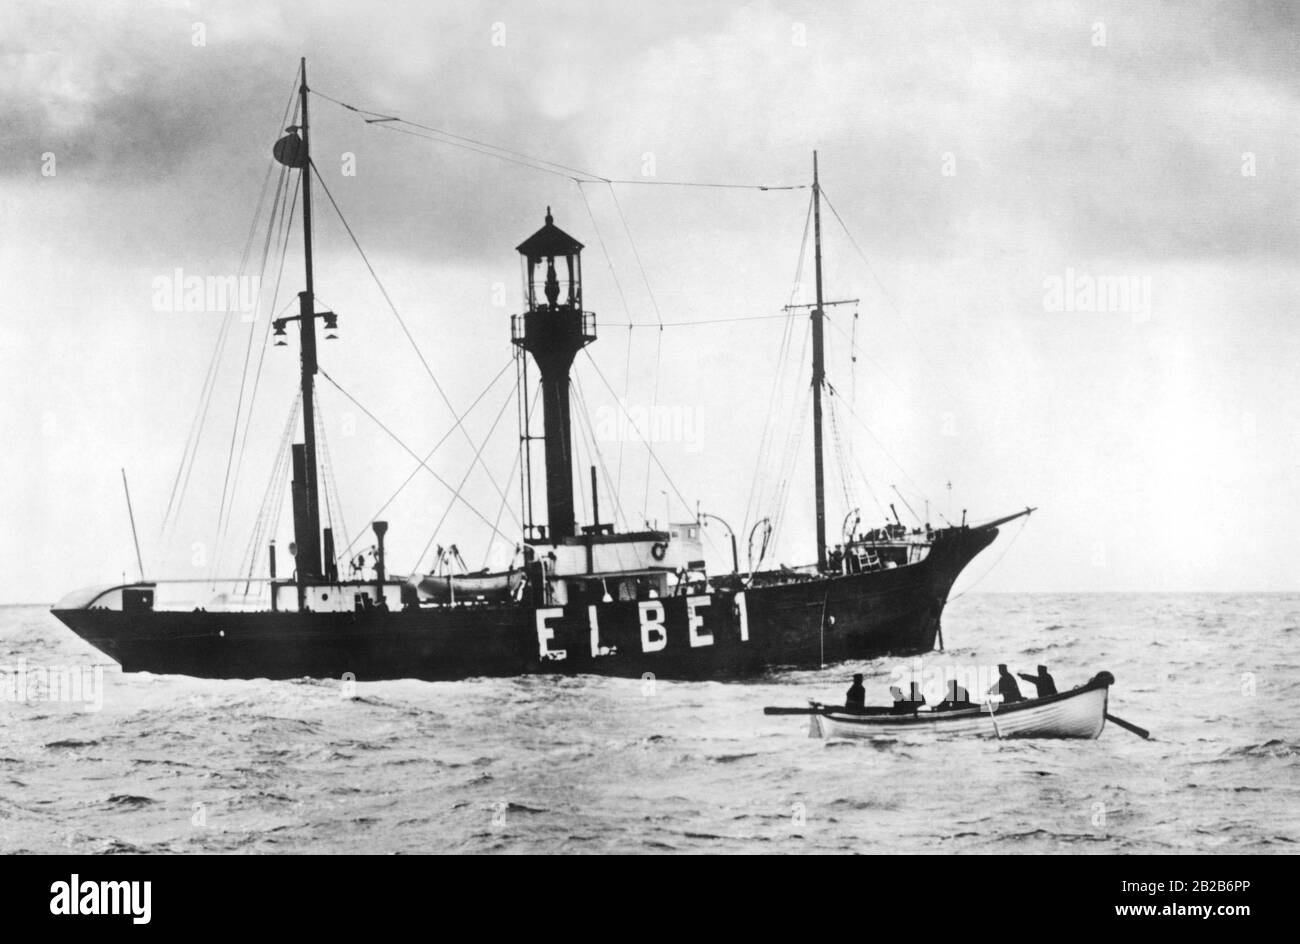 View of the lightship Elbe1, which was built in 1912. This ship sank in 1936. Undated photo, approx. 1920s. Stock Photo